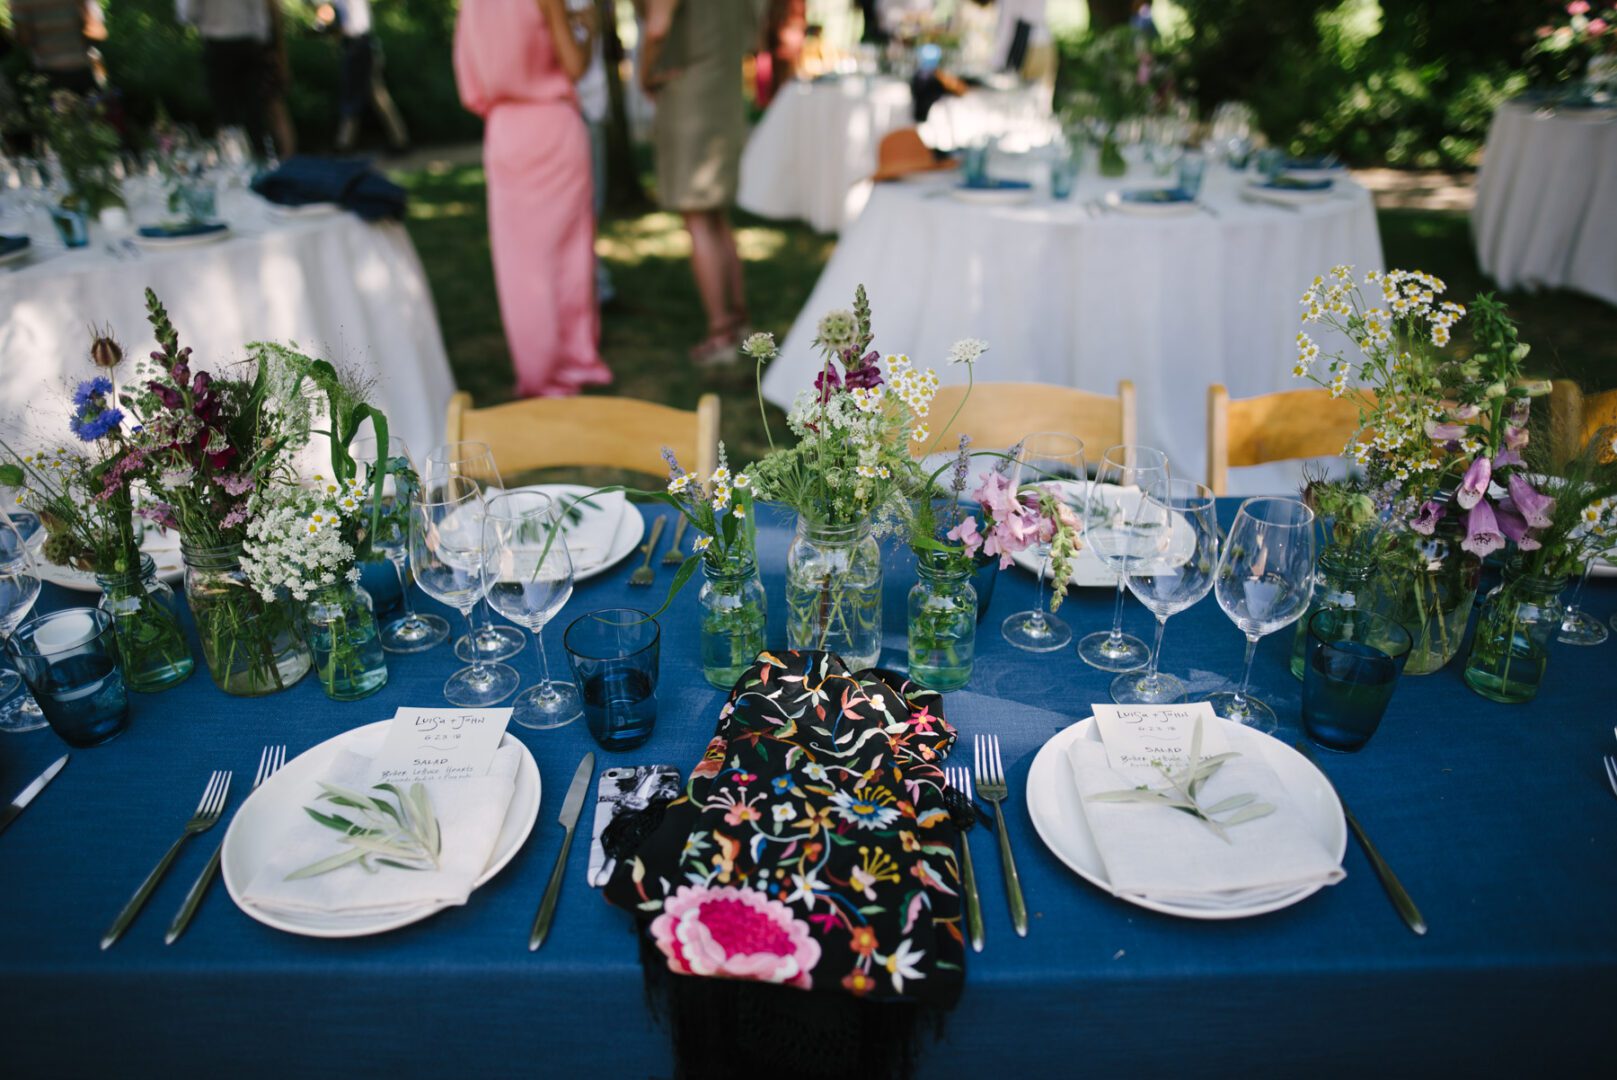 A blue tablecloth with flowers and plates on it.